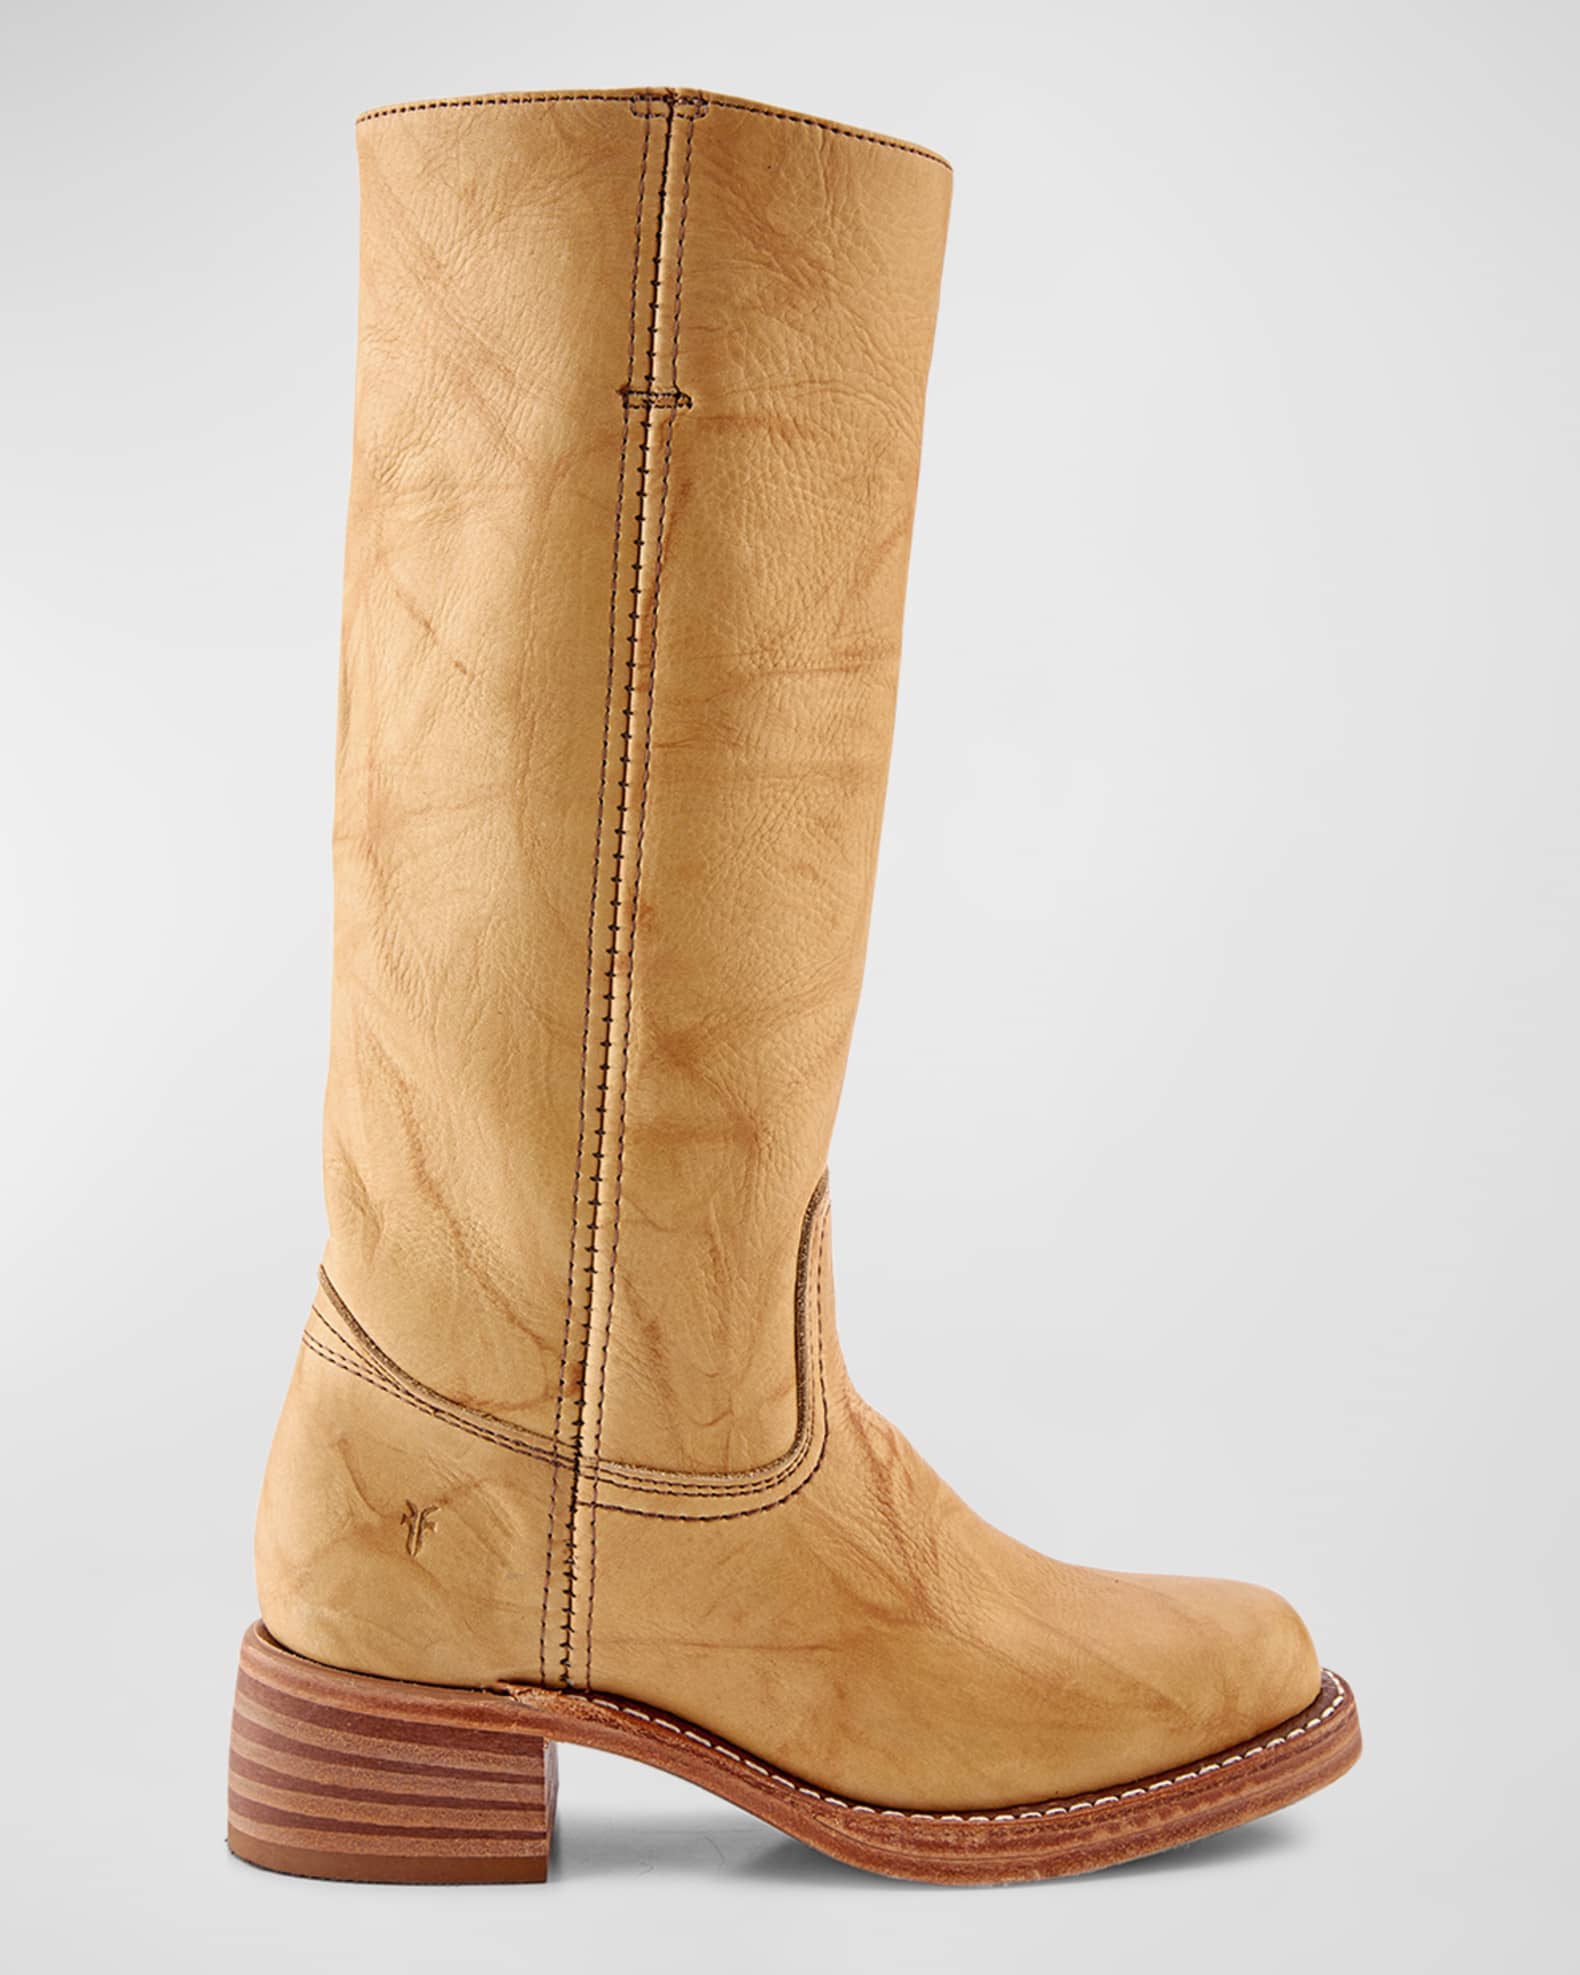 Frye Campus Tall Riding Boots | Marcus